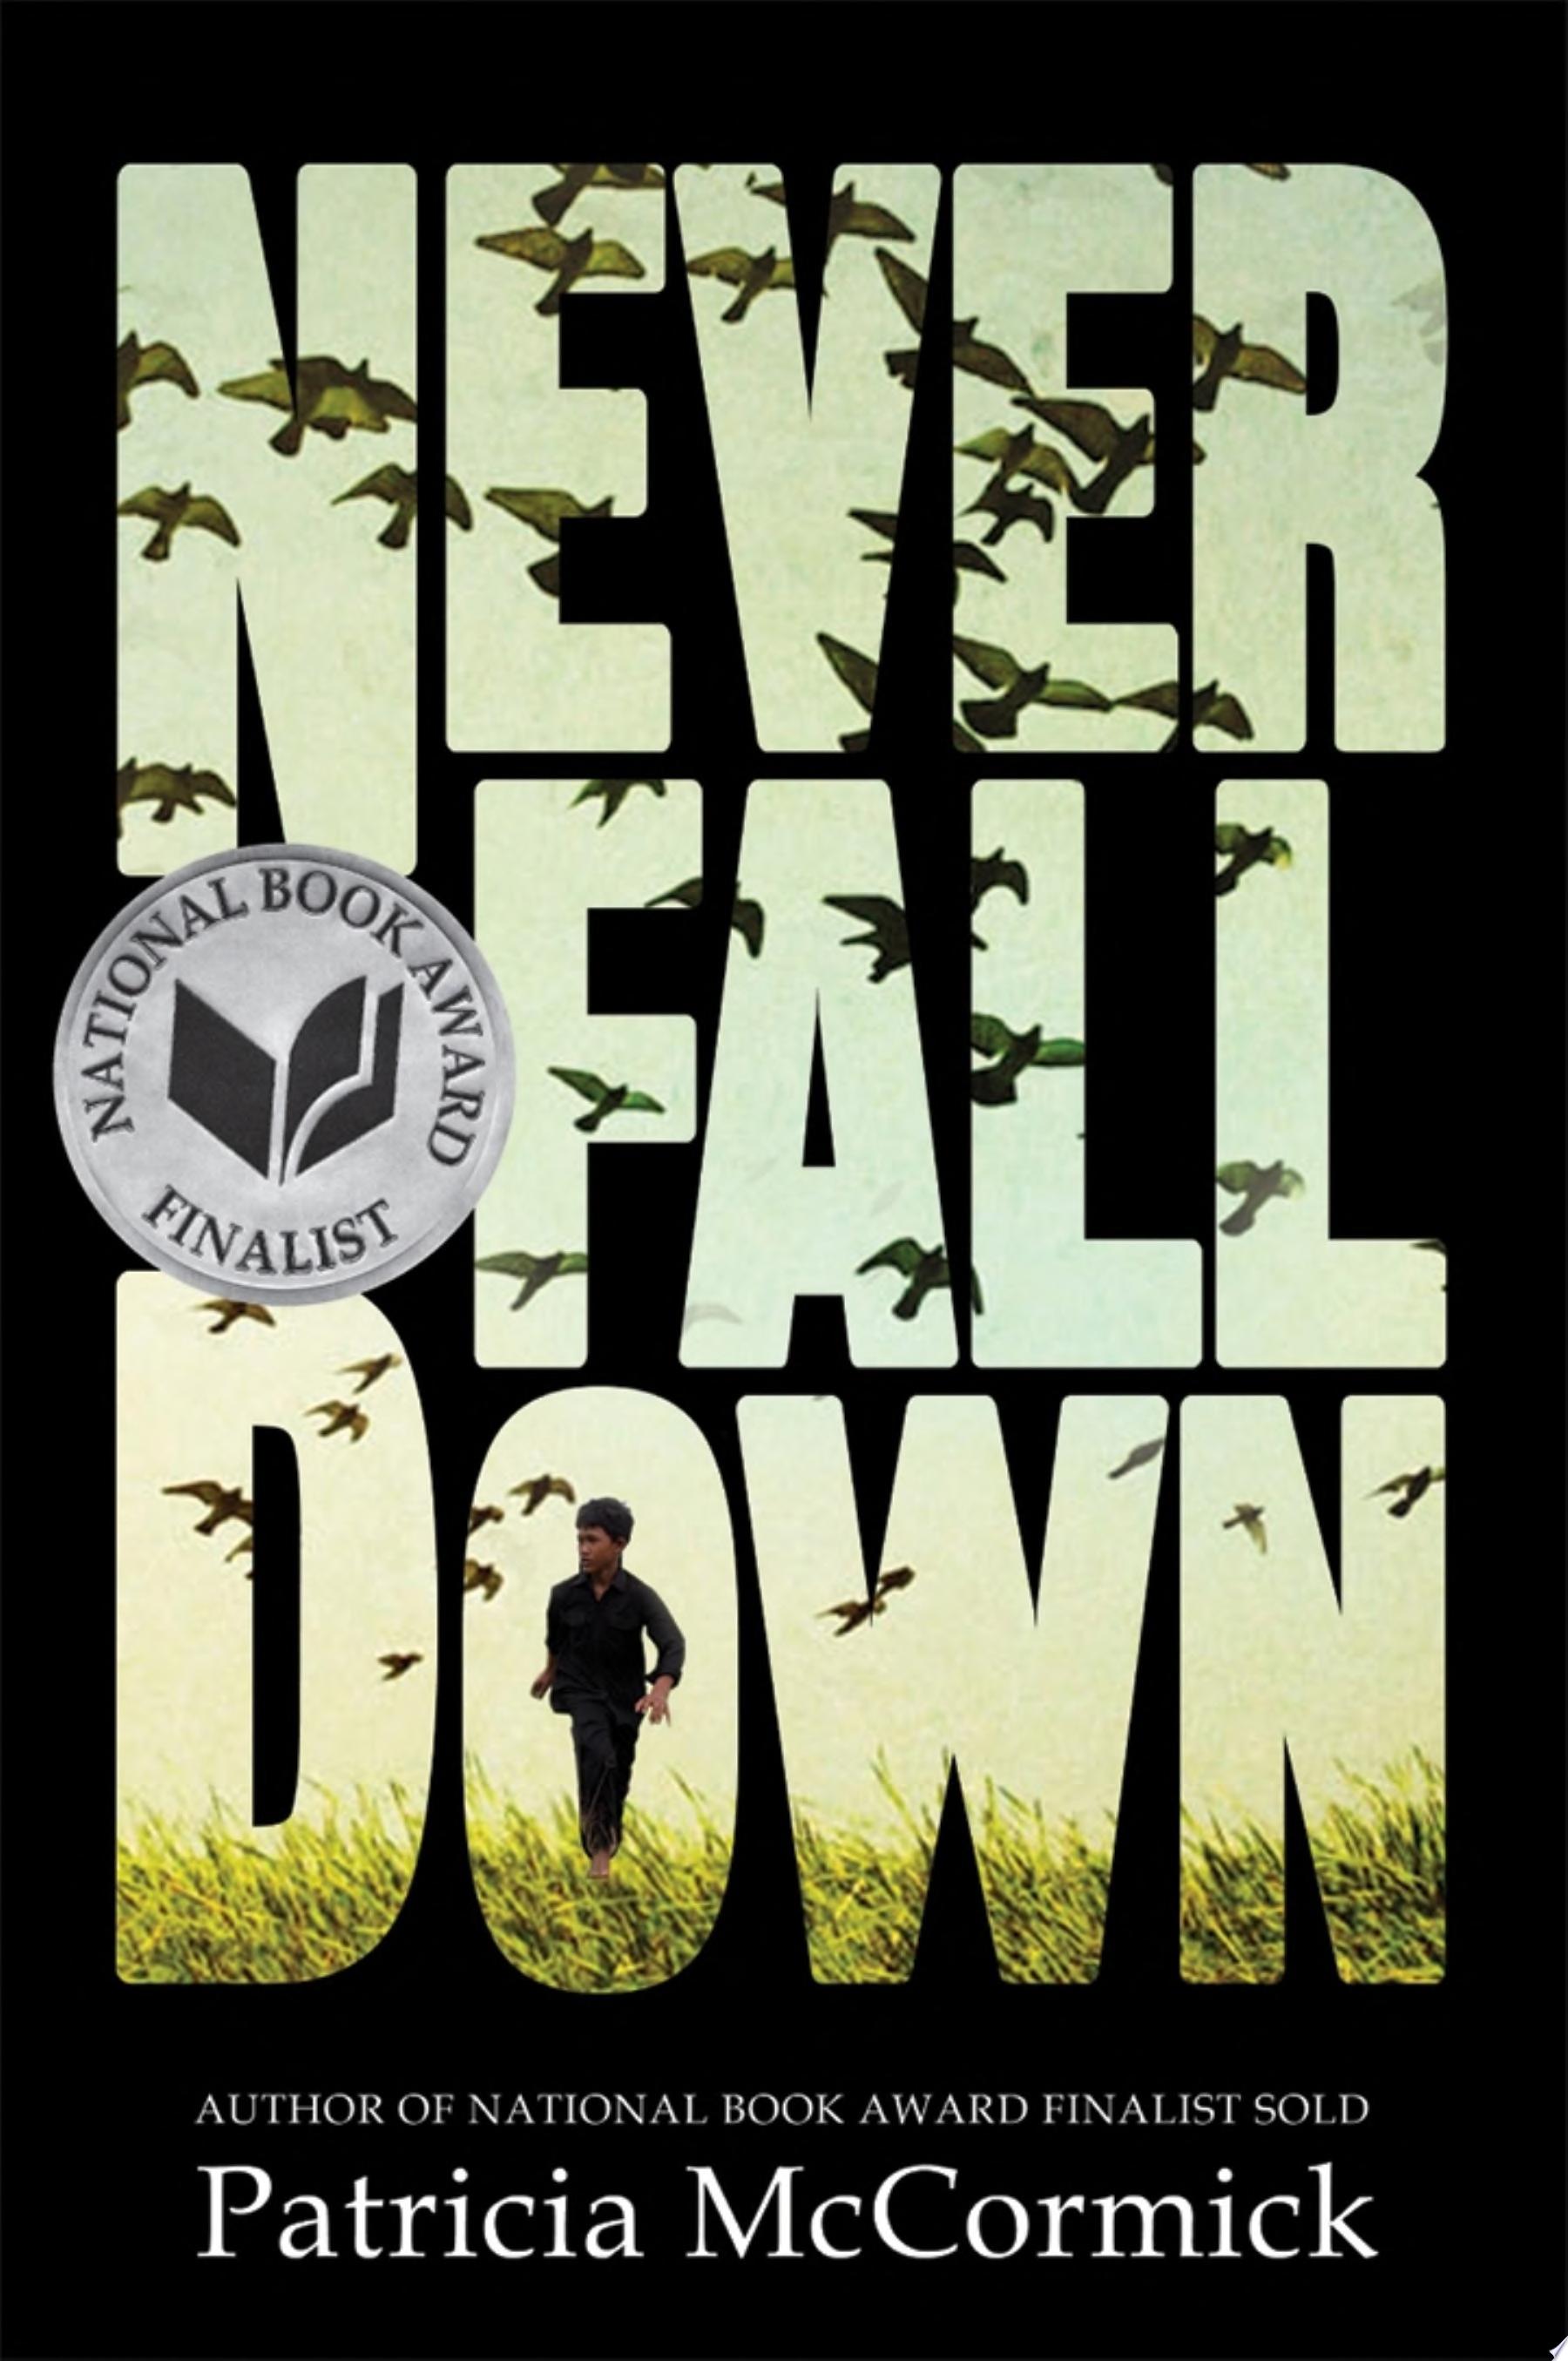 Image for "Never Fall Down"